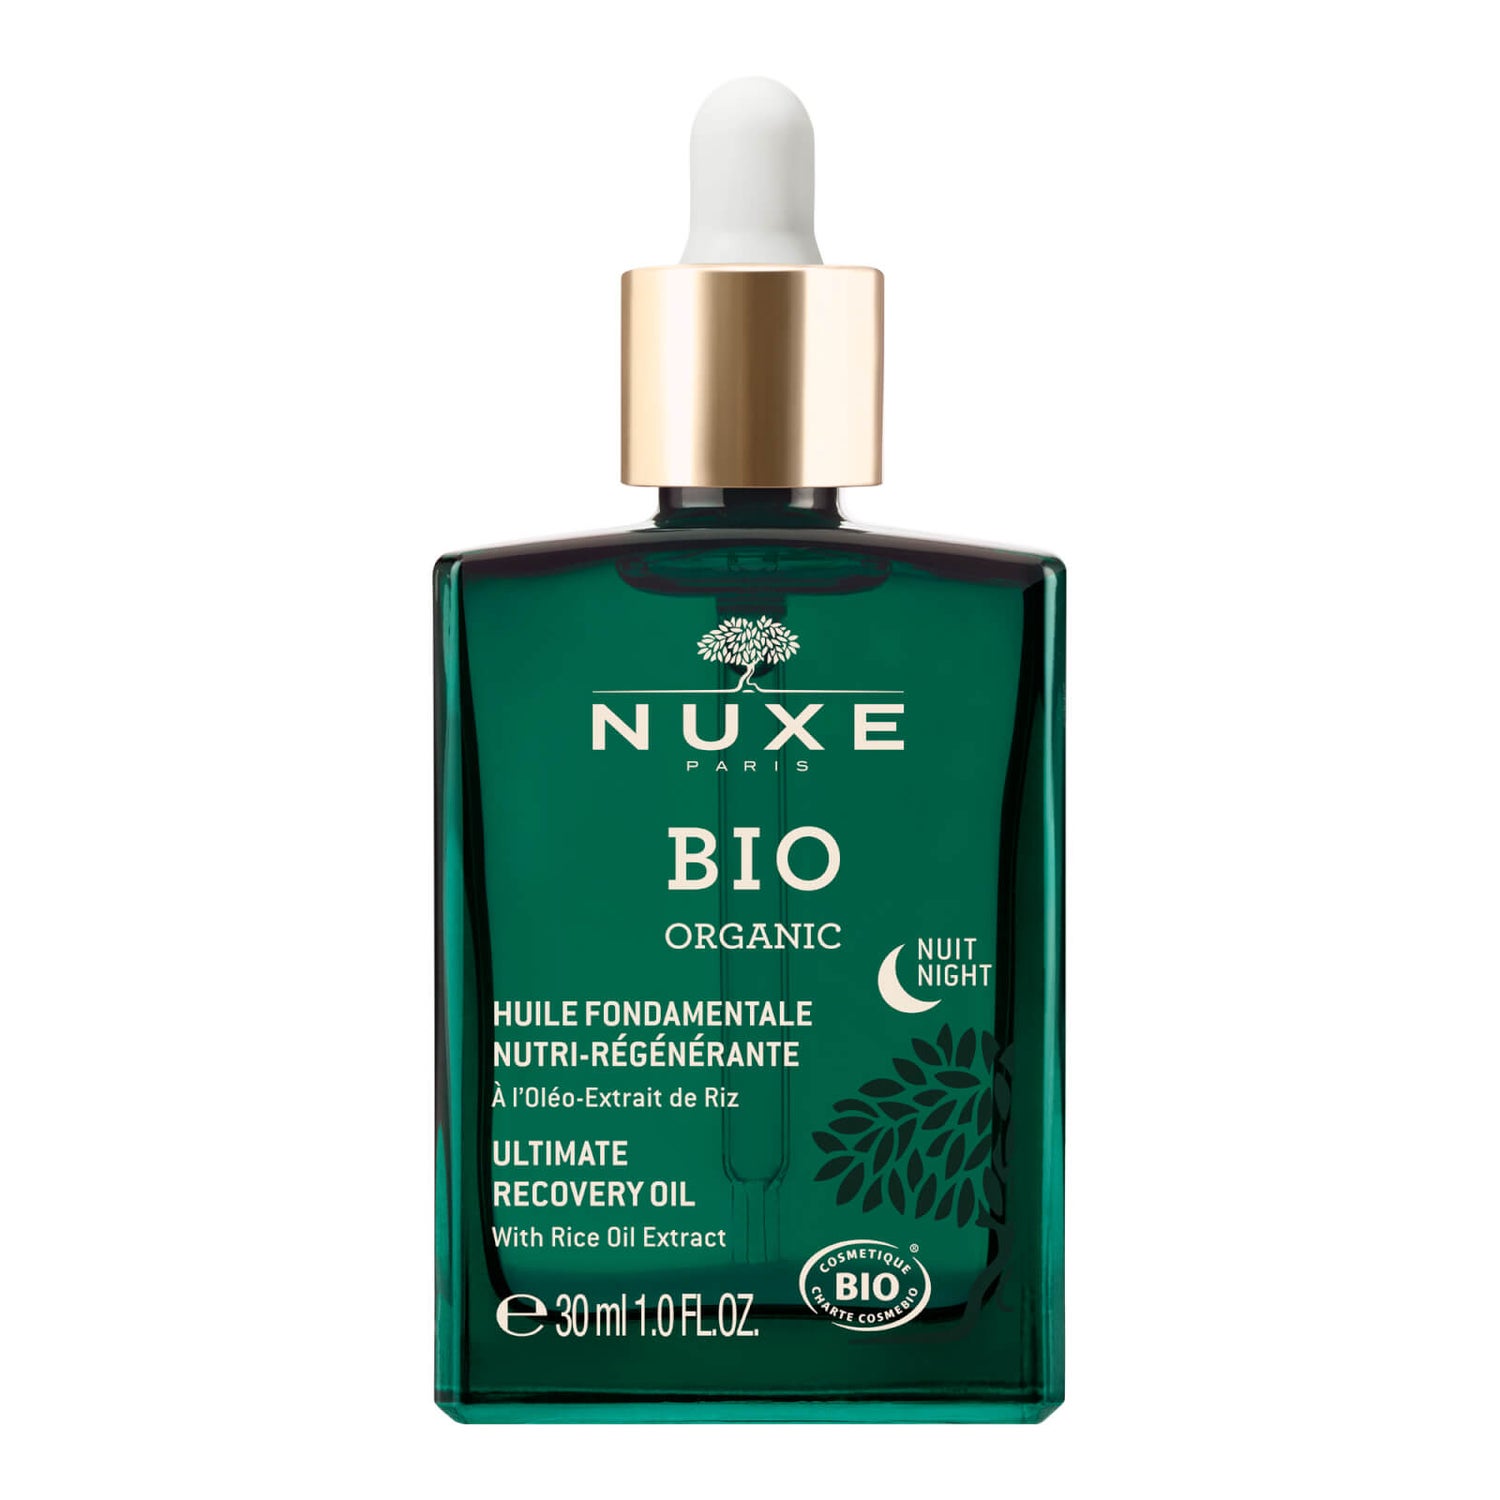 Nuxe Ultimate Recovery Oil 30ml, Nuxe Bio